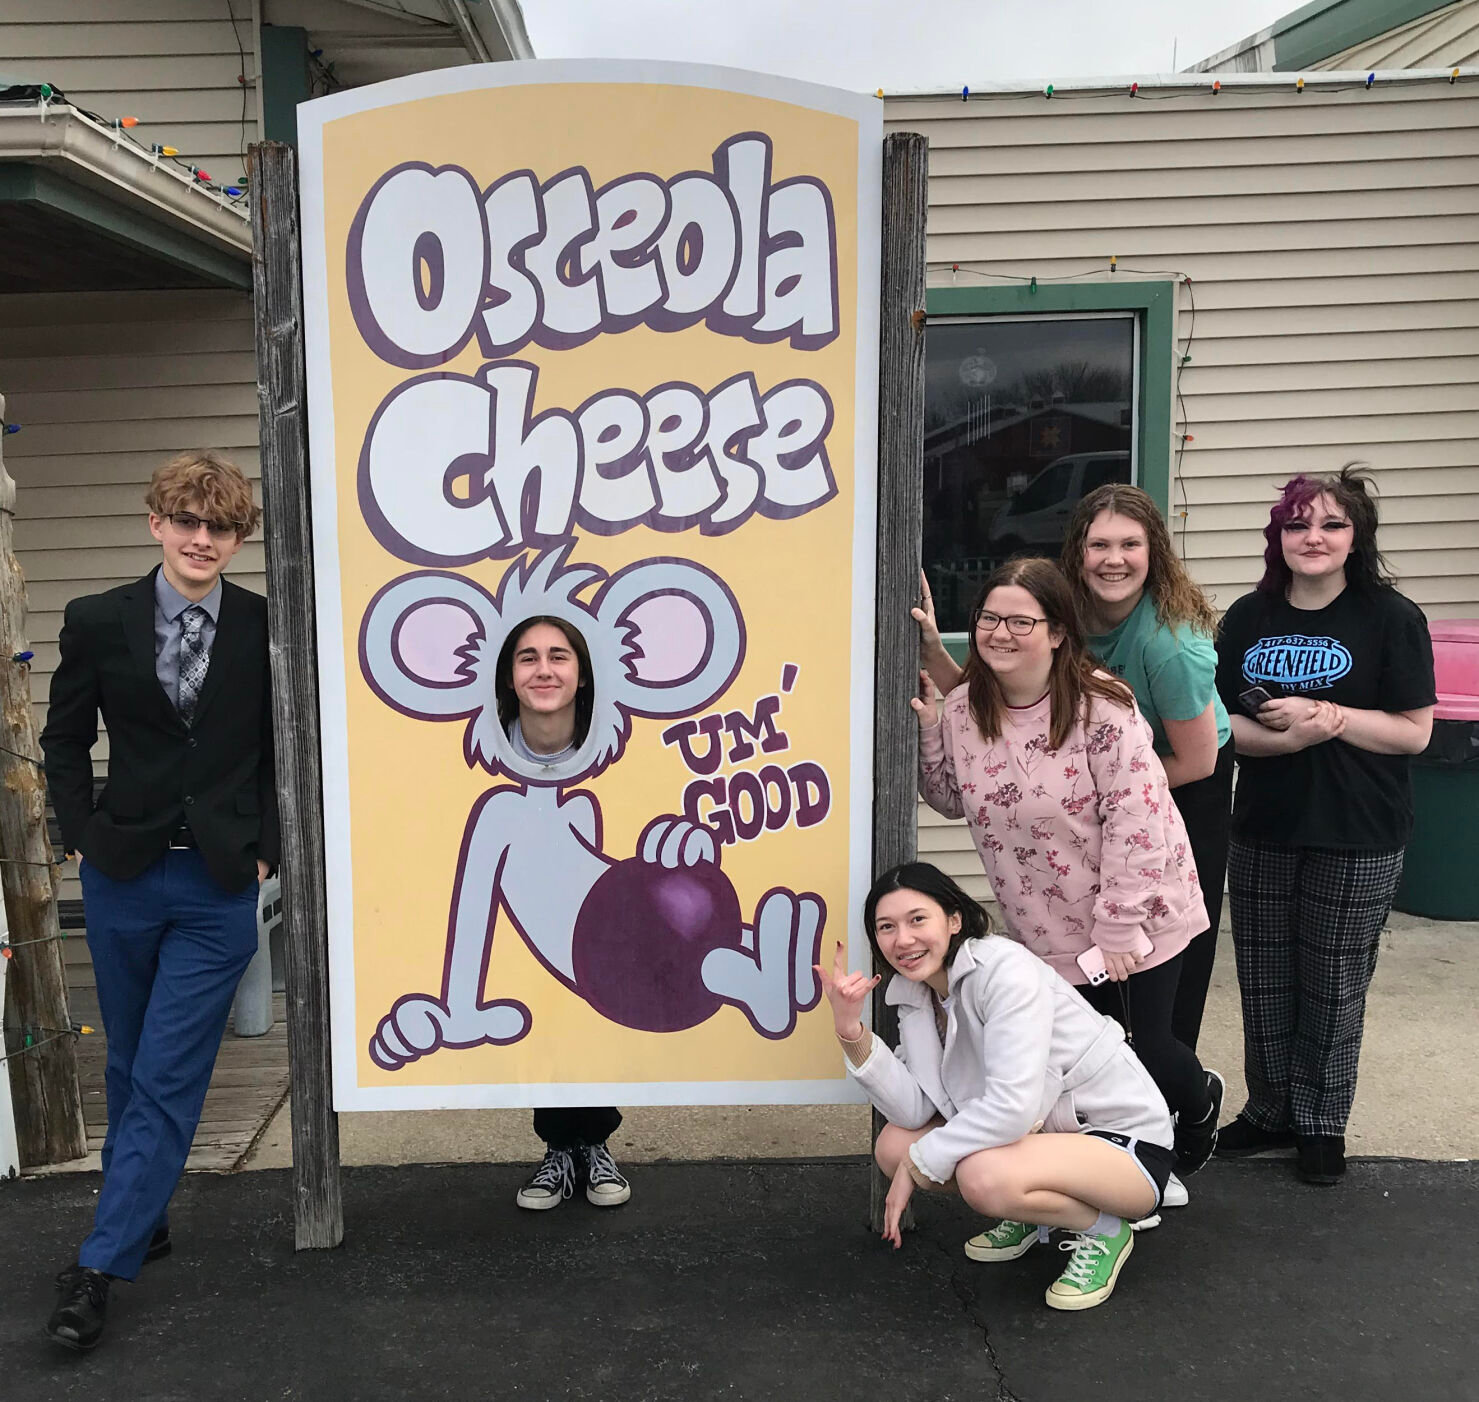 In team tradition they stopped at the Oseola Cheese Factory to take a group photo-unfortunately Scottie the Mouse, whom they usually pose with, was tied up so the team opted for the sign board alternative.